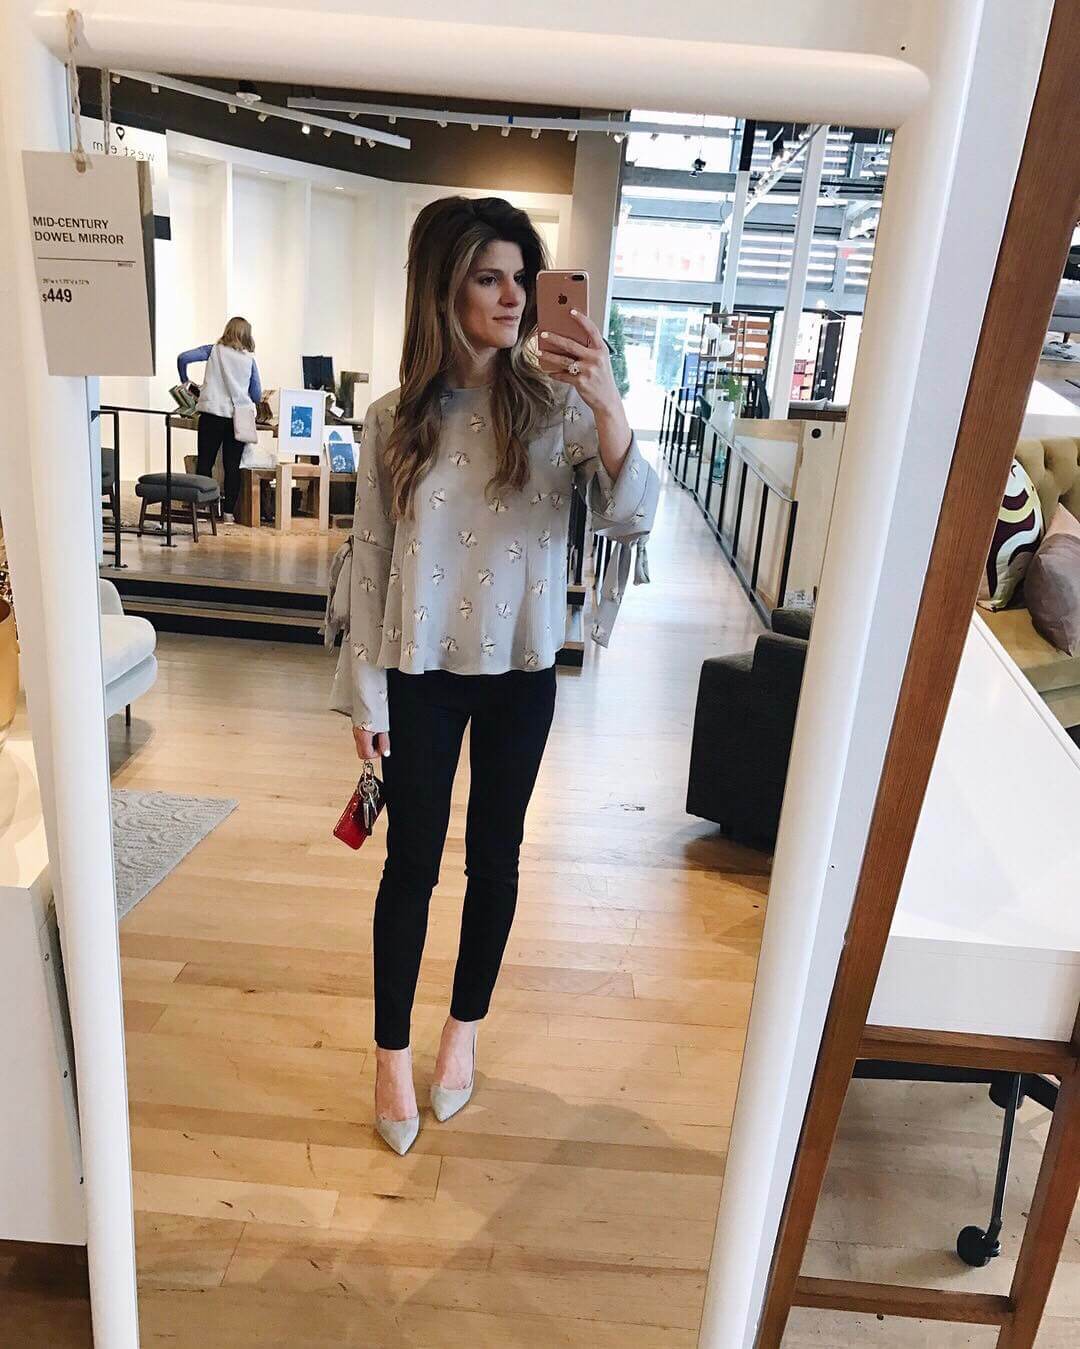 brighton the day mirror selfie shopping at west elm